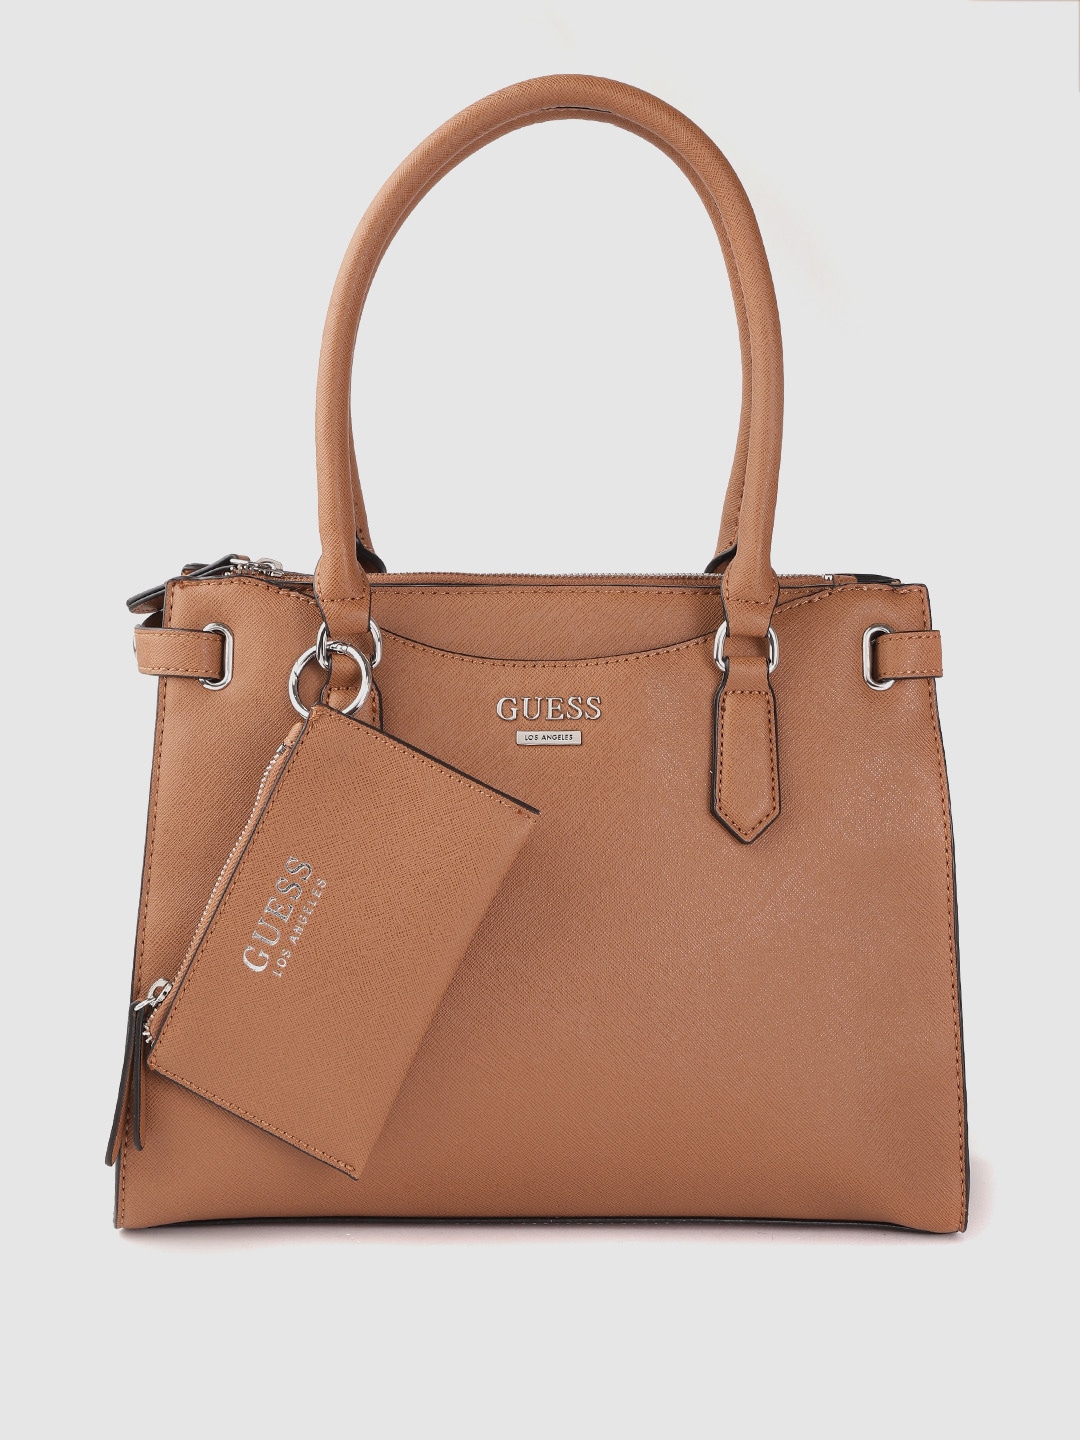 GUESS Women Tan Brown Solid Structured Handheld Bag Price in India